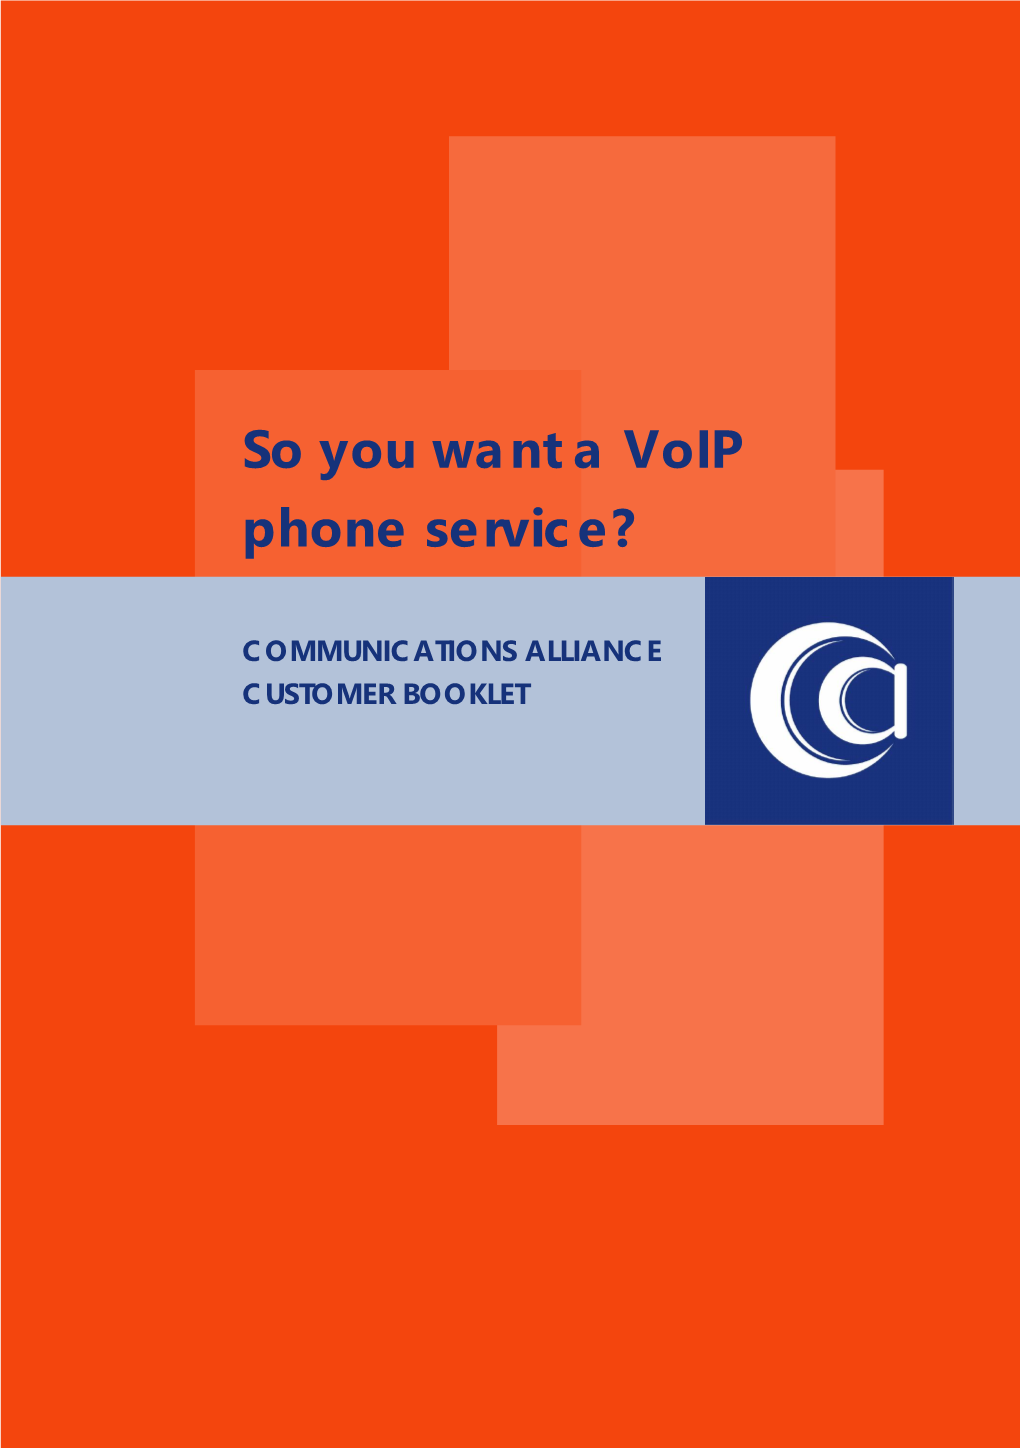 So You Want a Voip Phone Service?